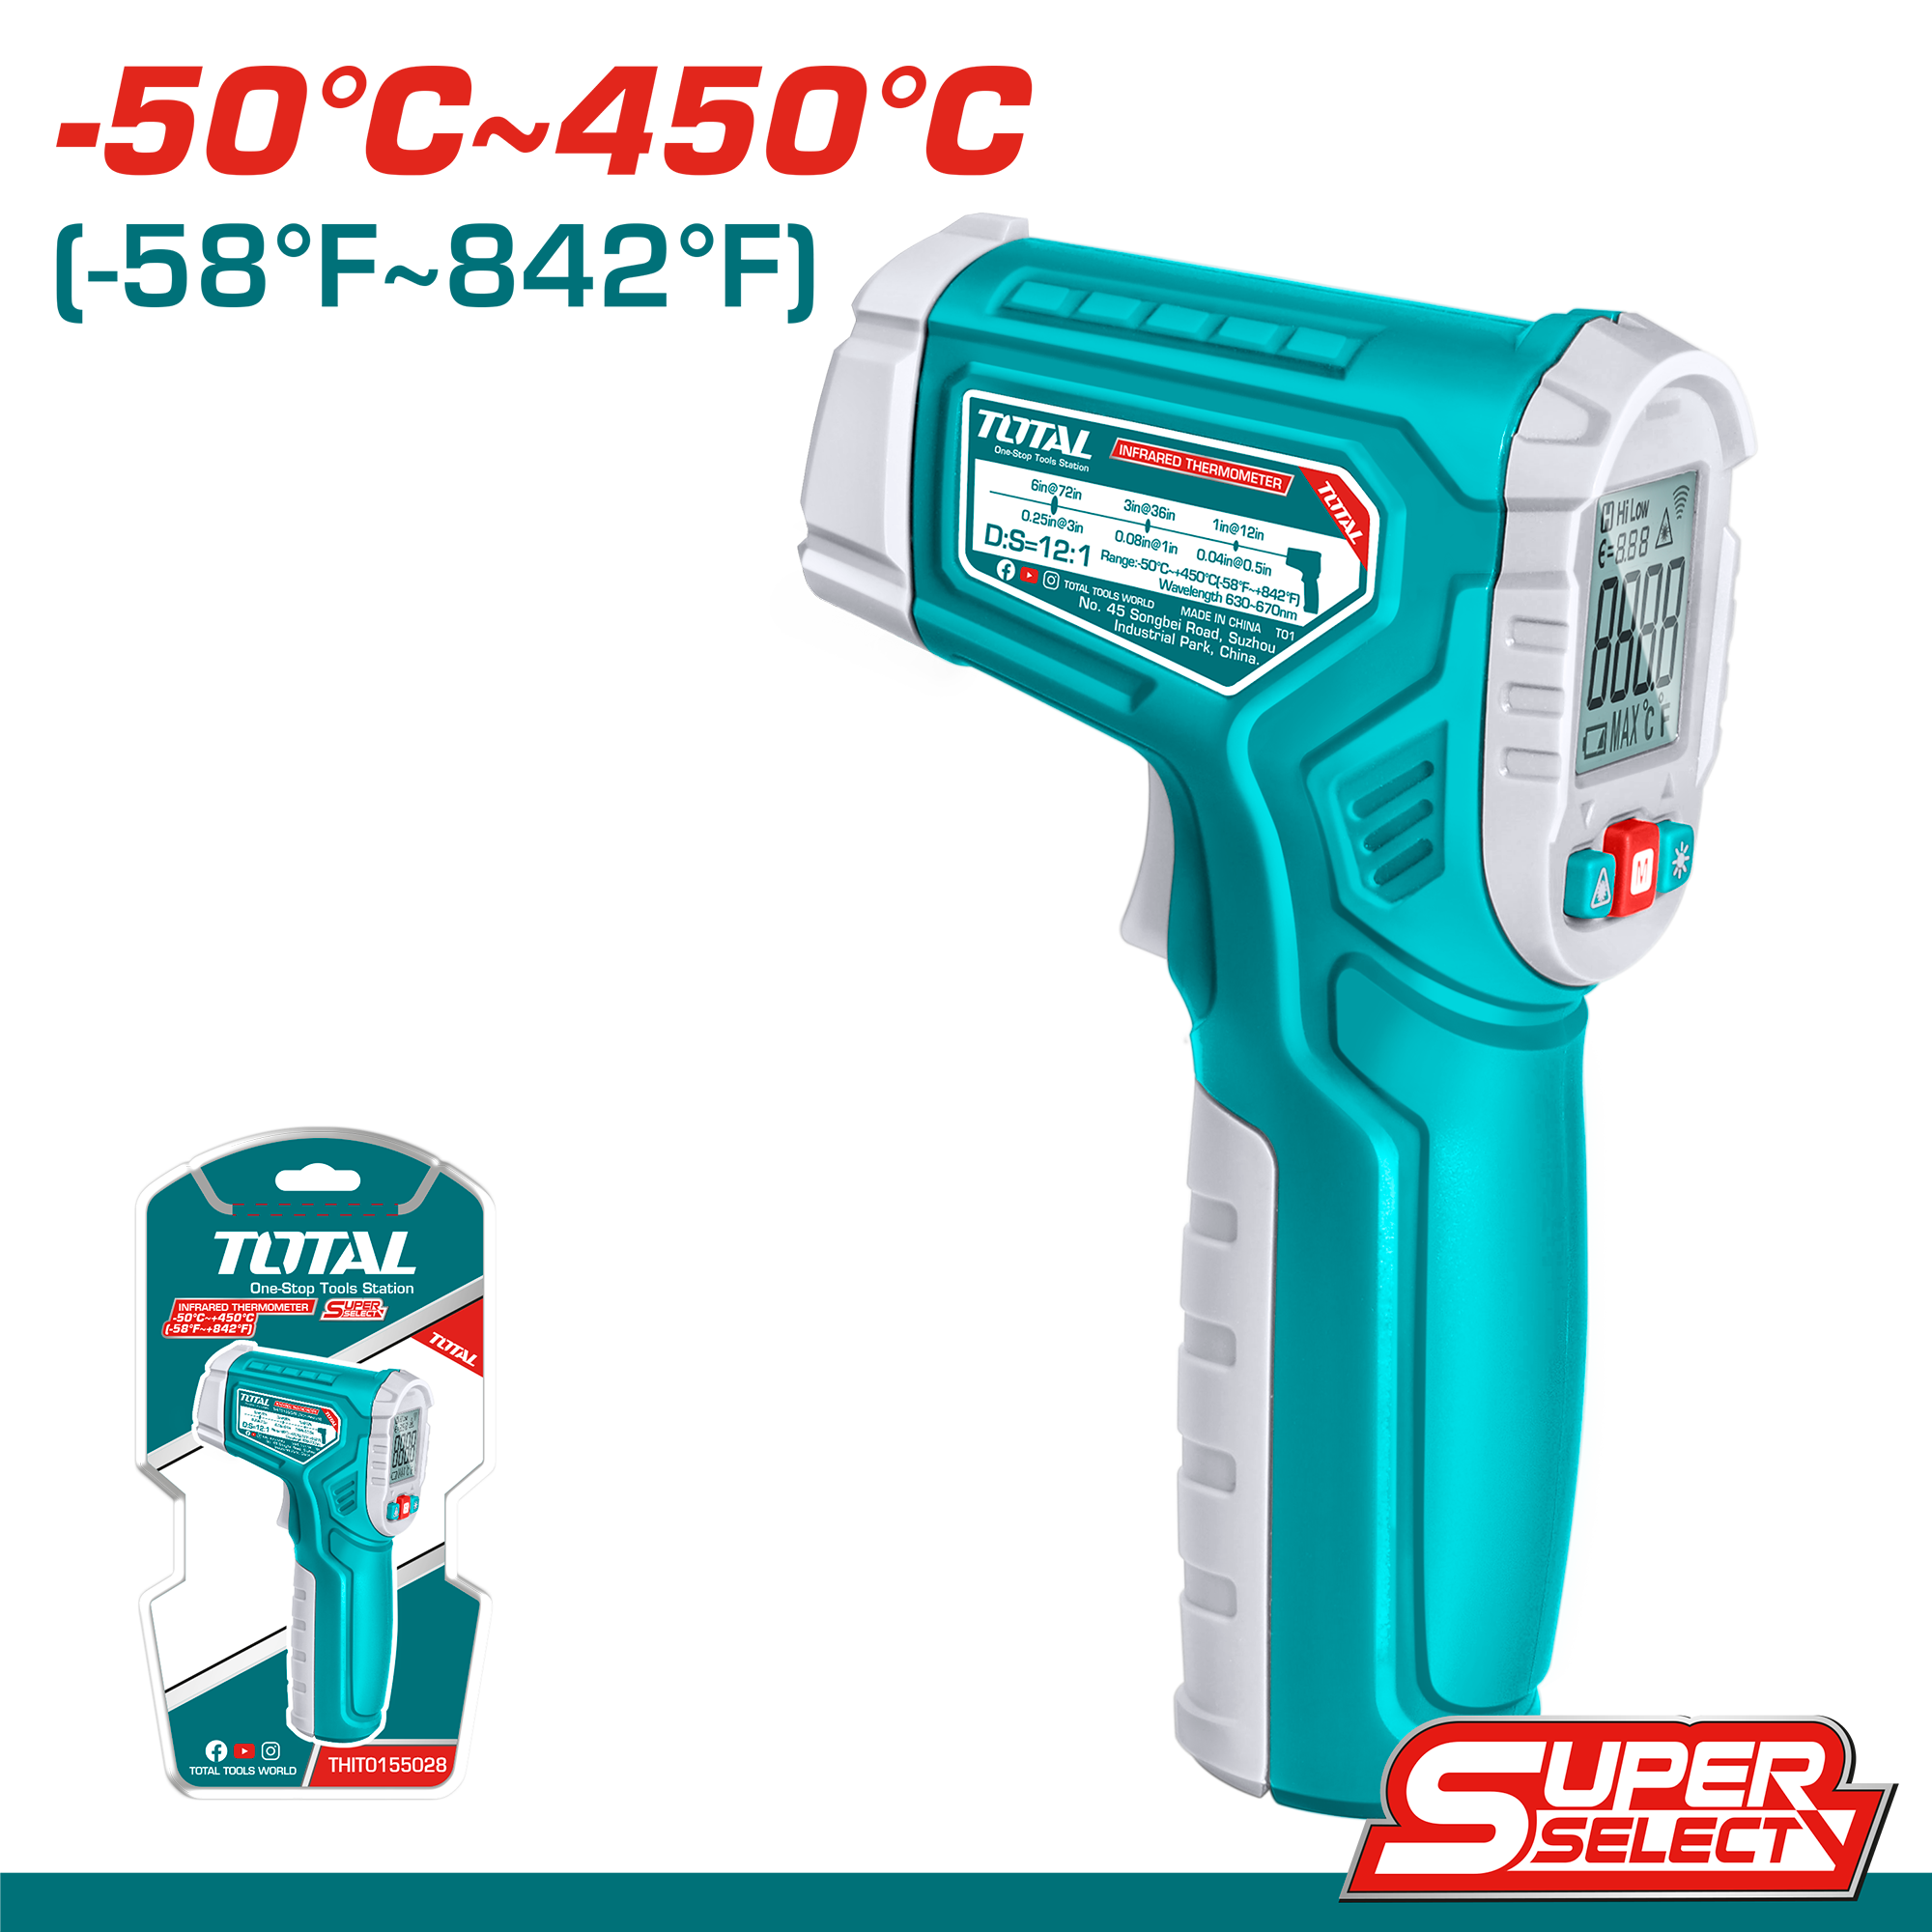 INFRARED THERMOMETER SUPER SELECT